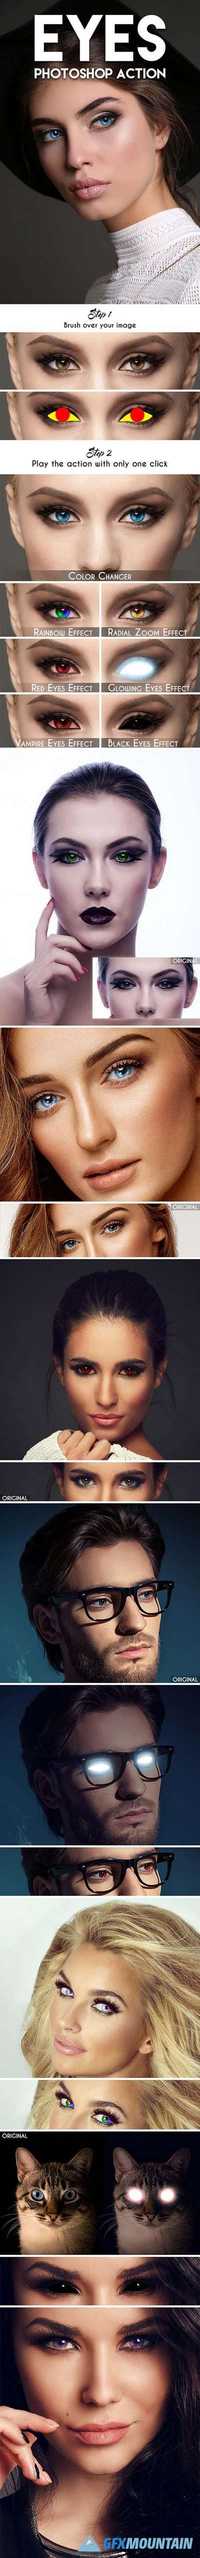 GraphicRiver - Eyes Photoshop Action - 19363896